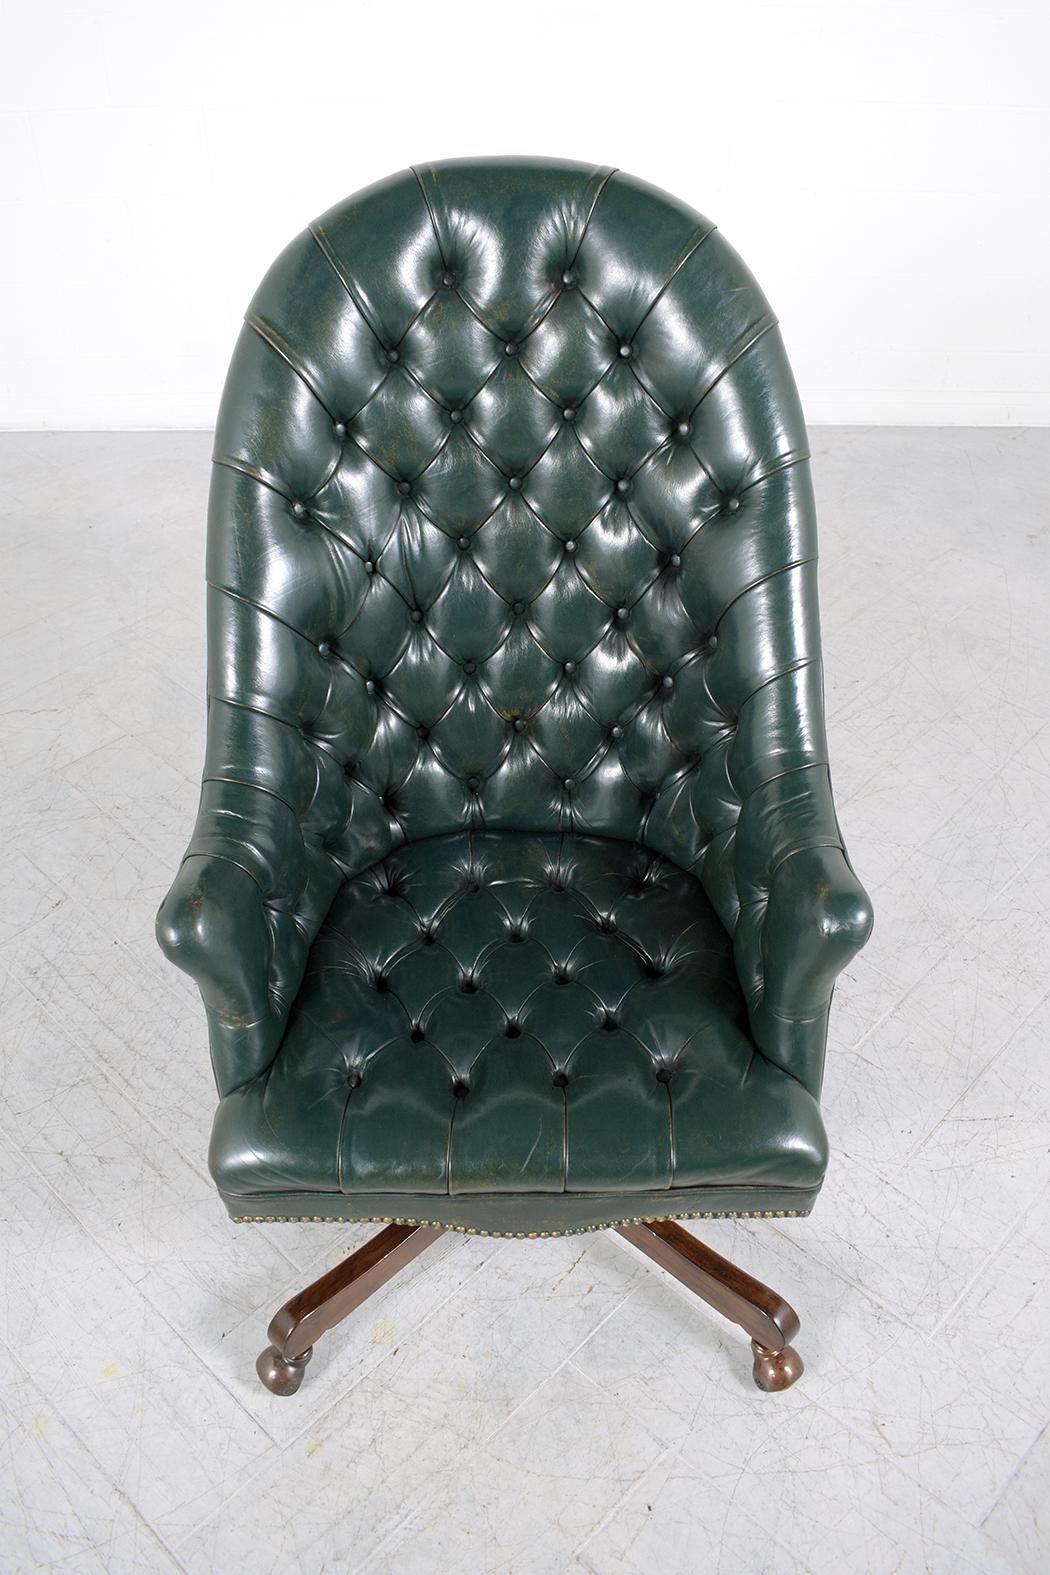 European Vintage Chesterfield Leather Chair